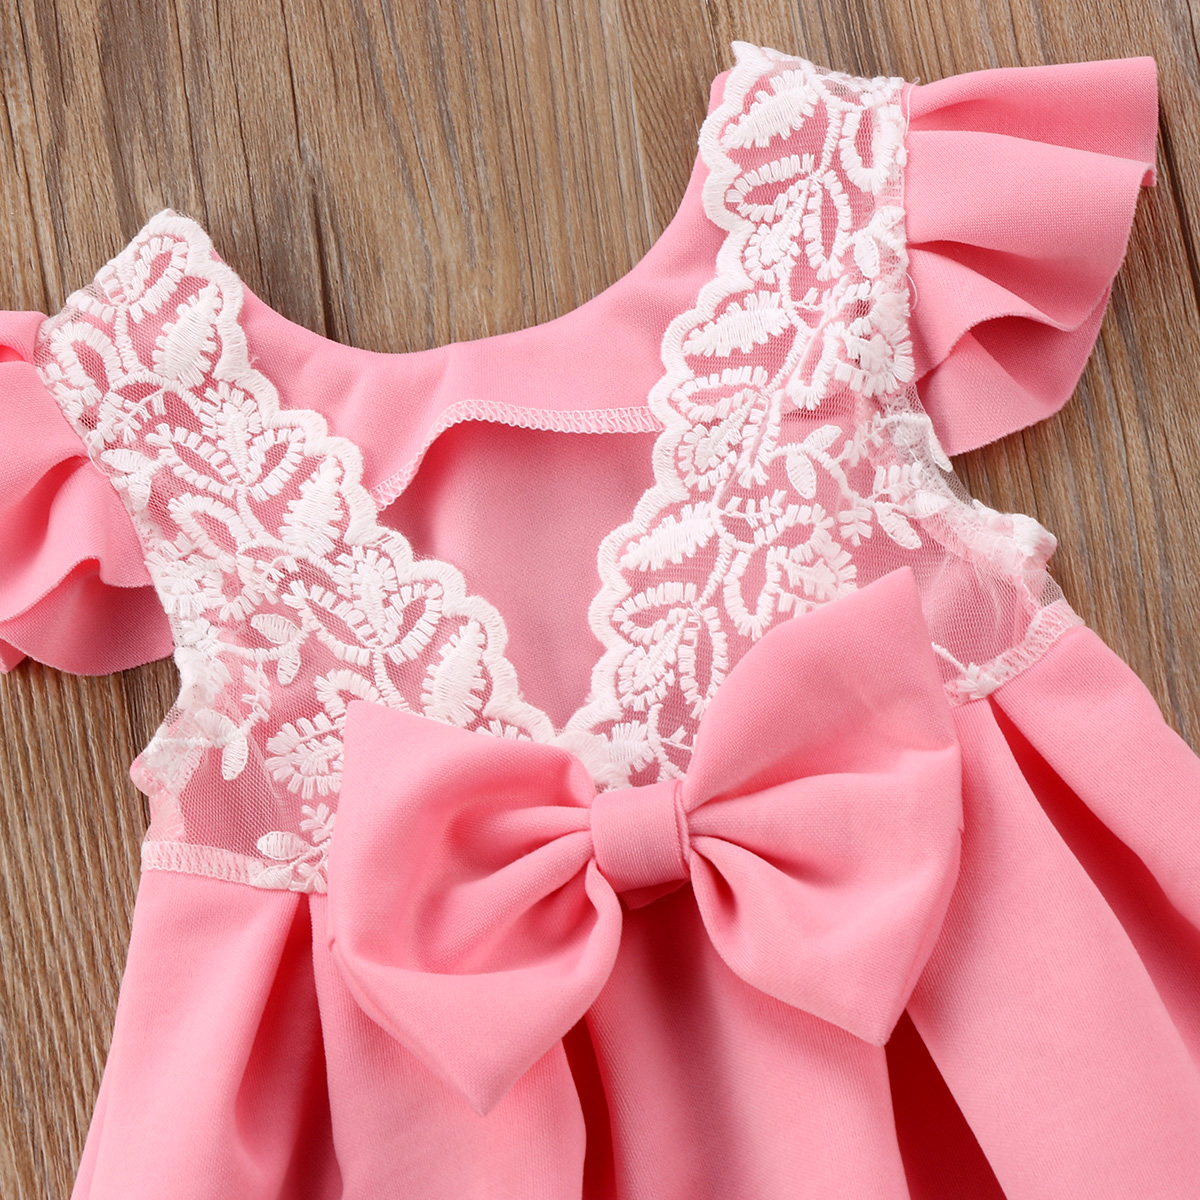 Pudcoco Baby Girls Dress Toddler Girls Backless Lace Bow Princess Dresses Tutu Party Wedding birthday Dress for girls Easter